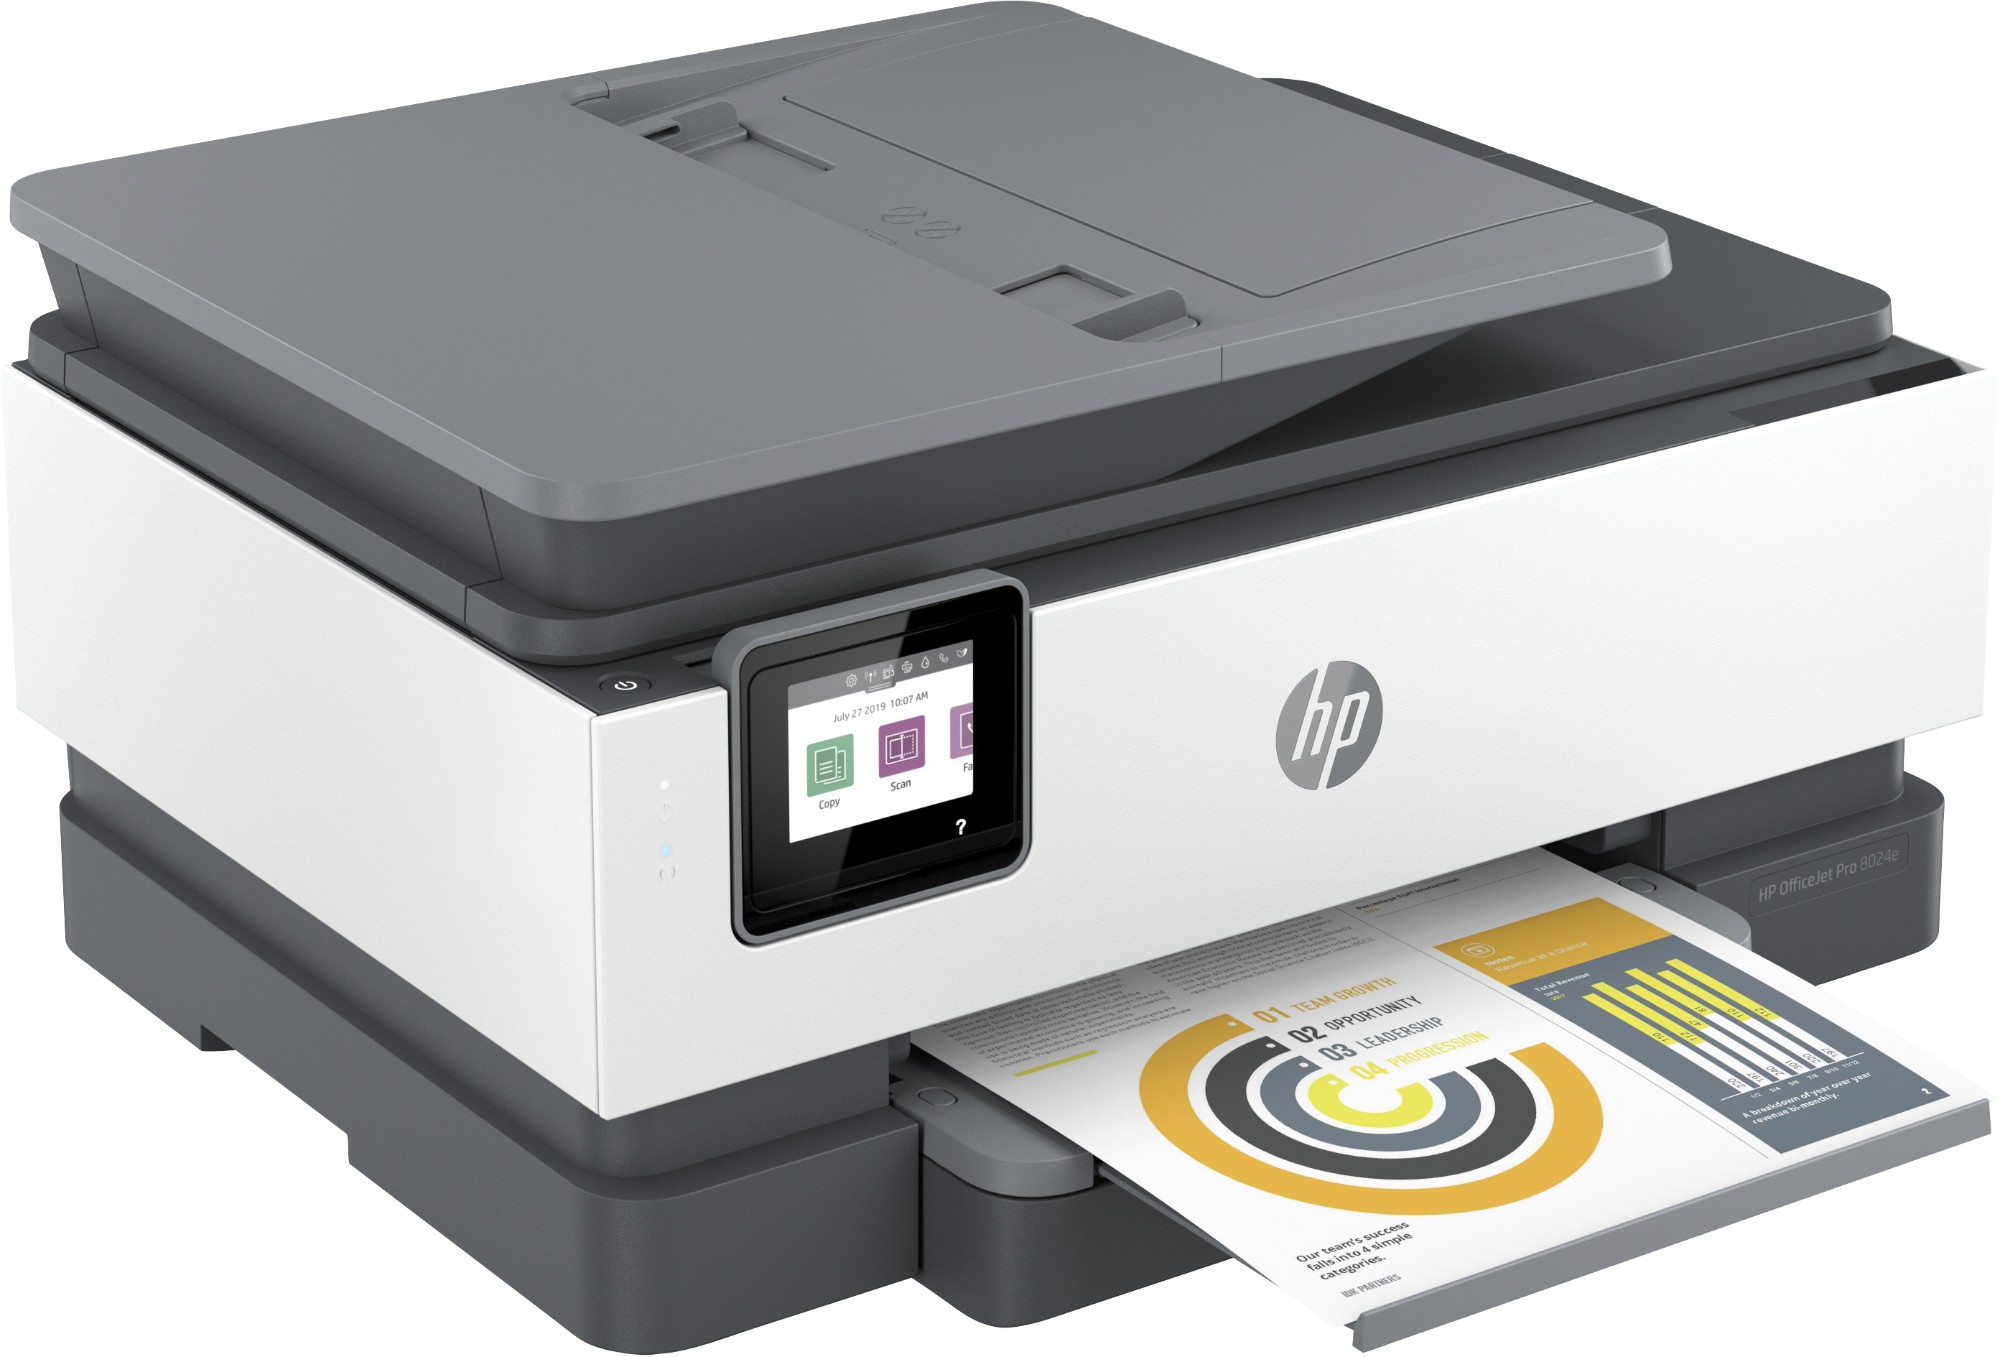 HP OfficeJet Pro HP 8024e All-in-One Printer, Home, Print, copy, scan, fax, HP+; HP Instant Ink eligible; Automatic document feeder; Two-sided printing